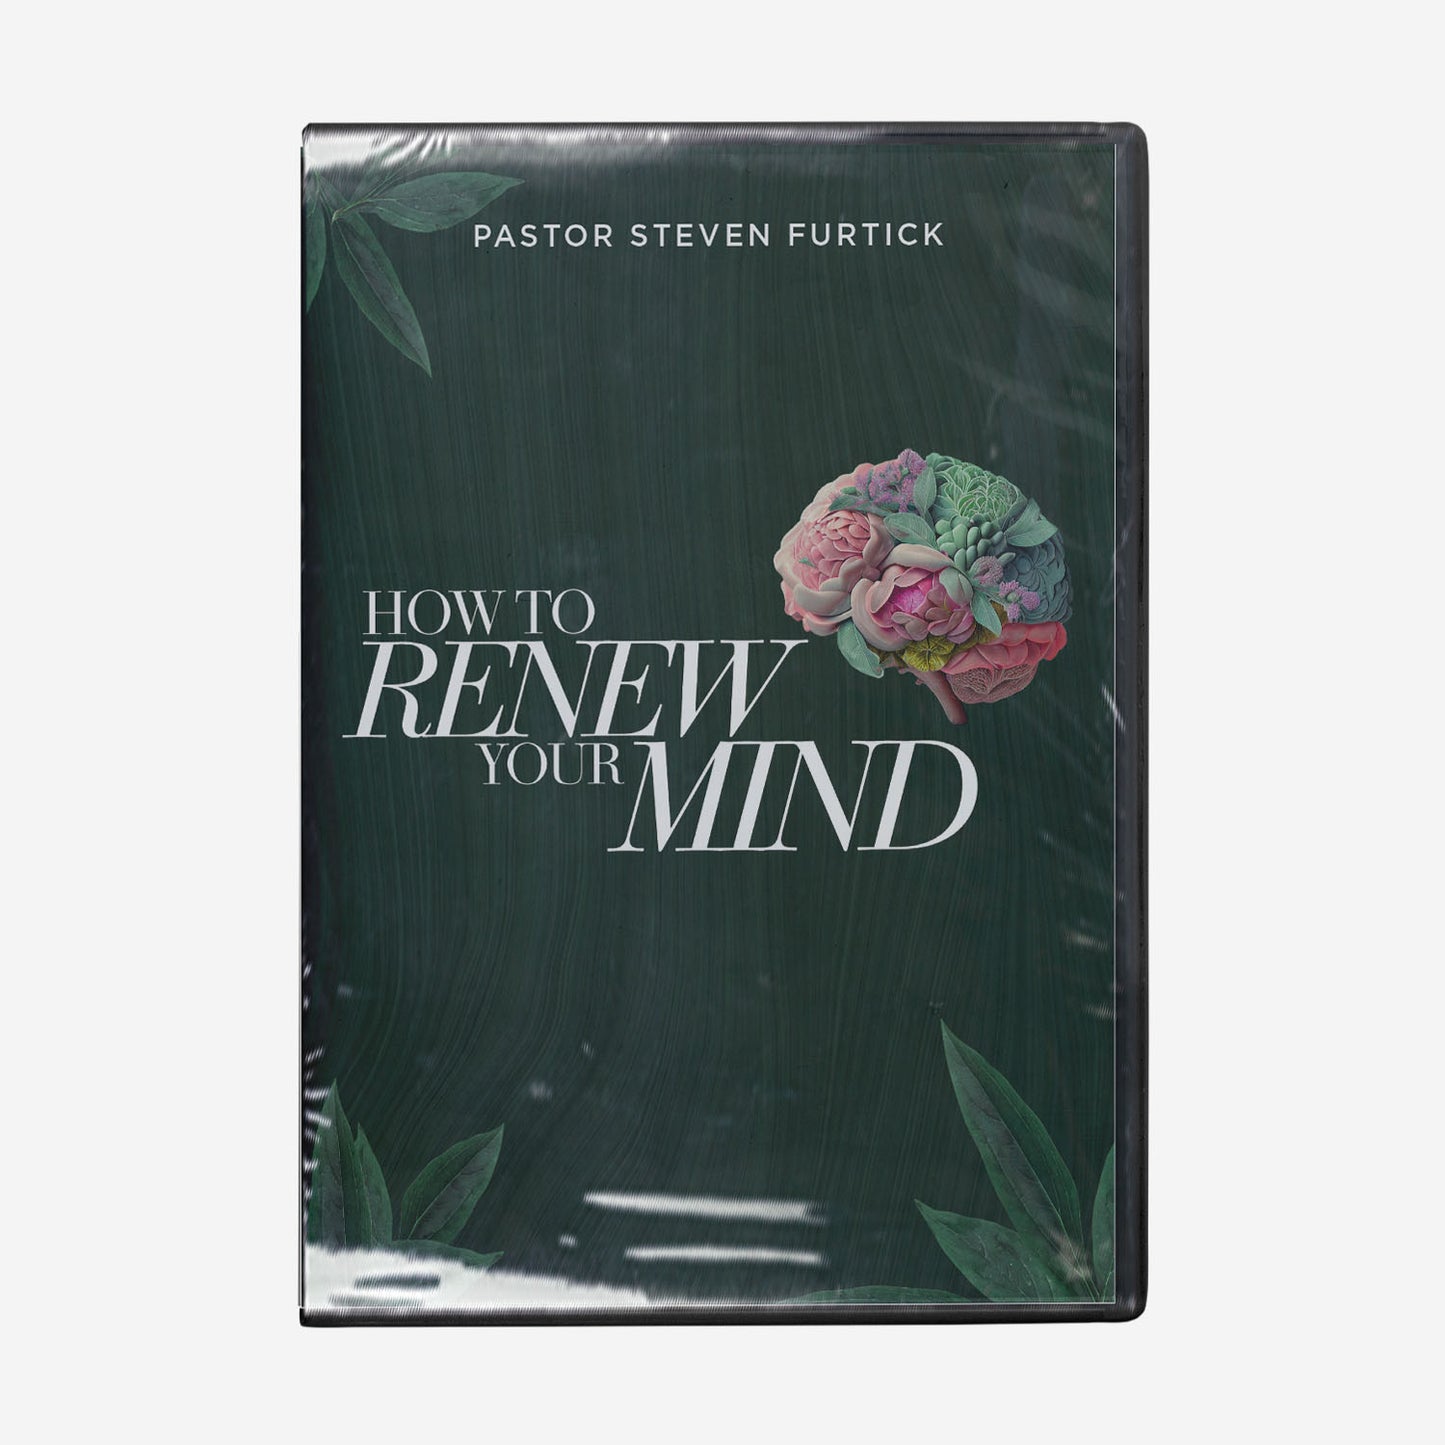 How to Renew Your Mind DVD